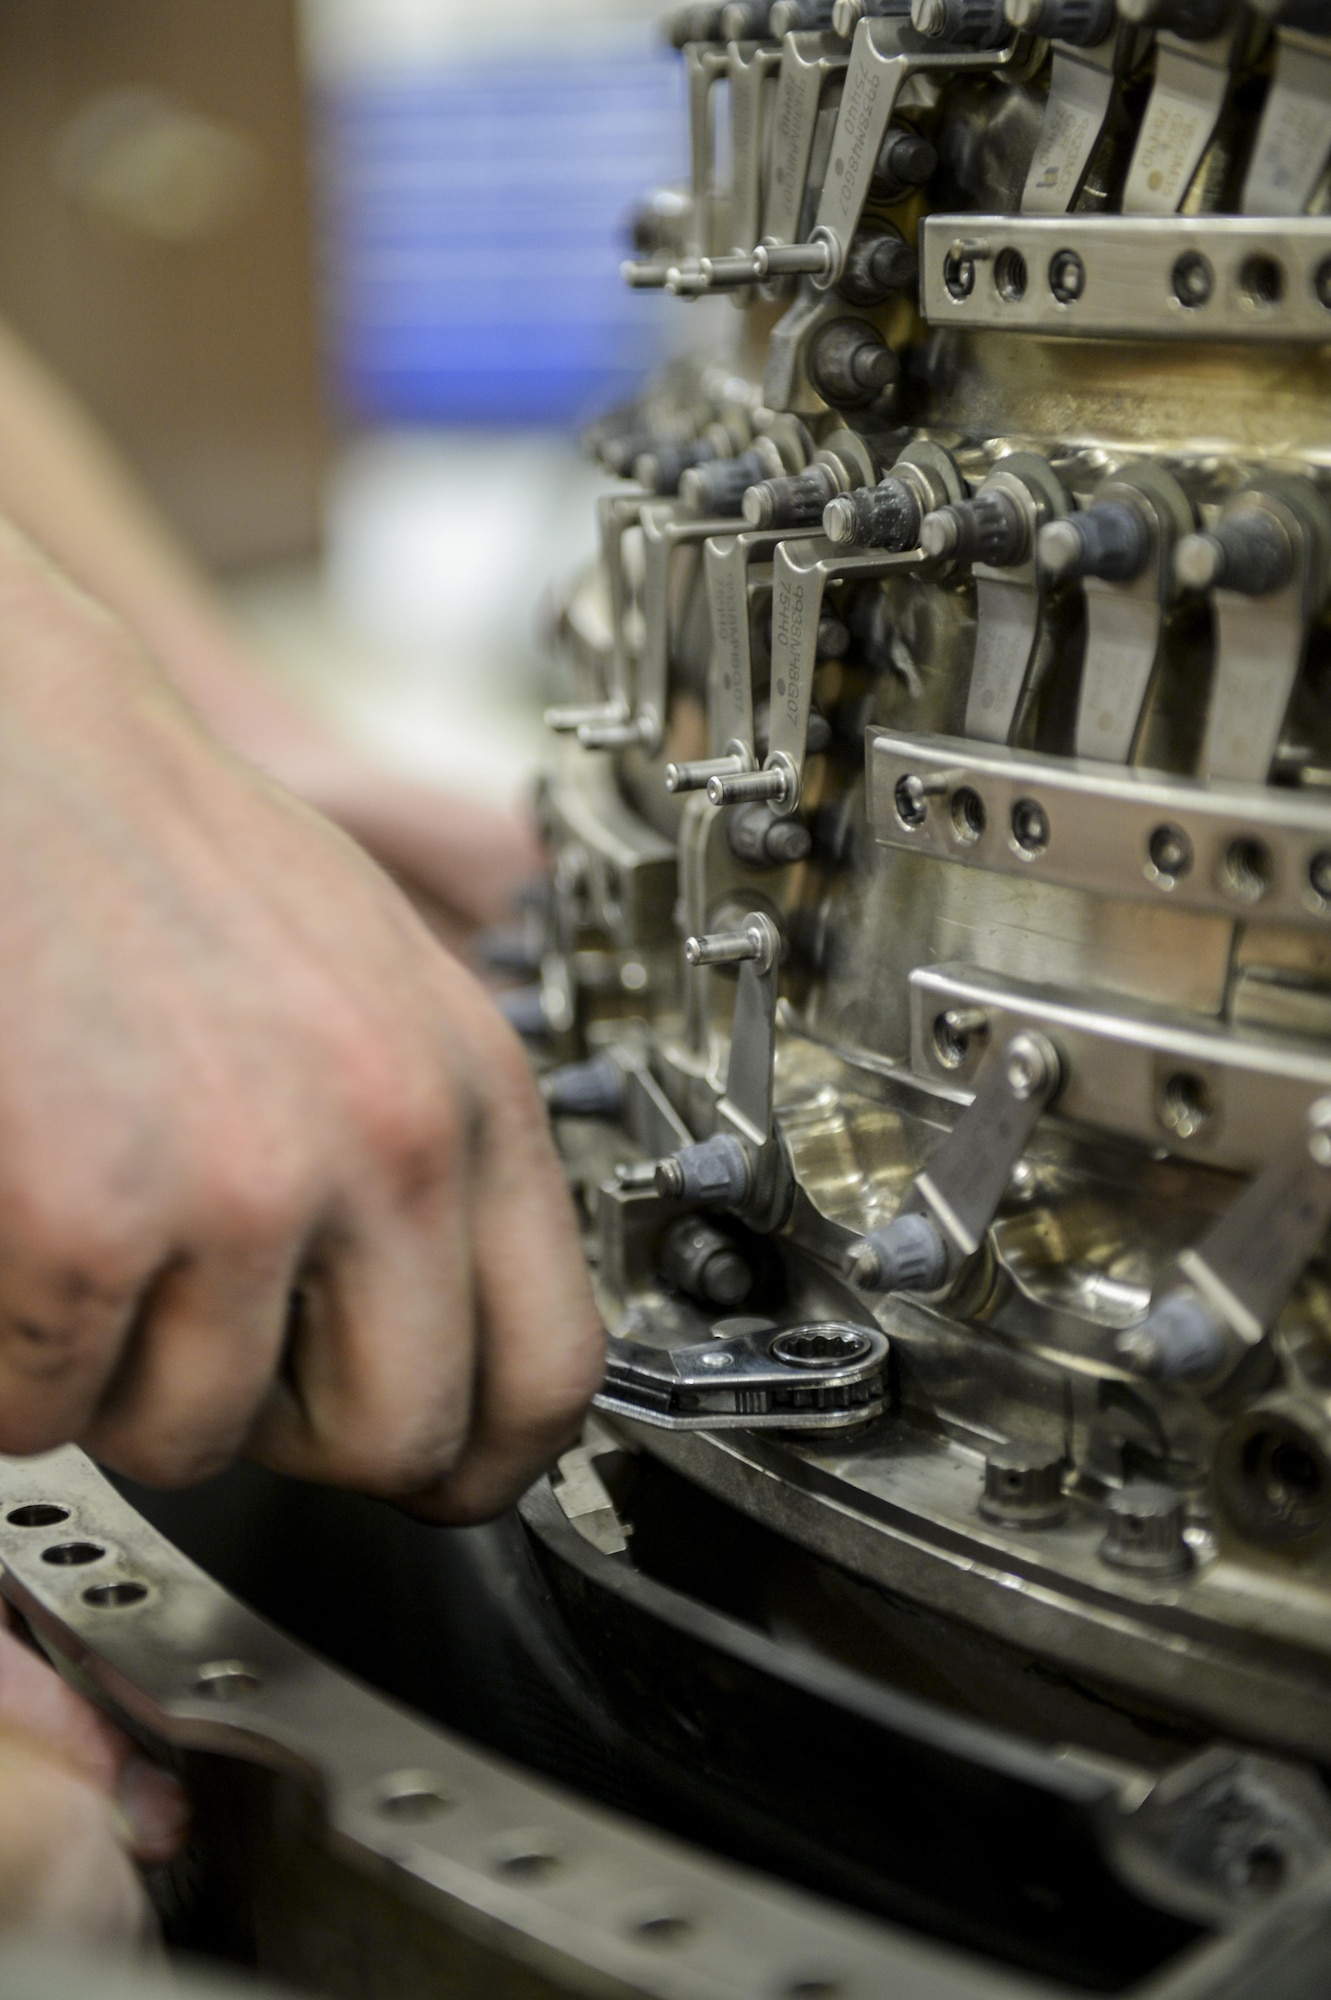 U.S. Air Force Senior Airman Cody Bowman, a 354th Maintenance Squadron aerospace propulsion journeyman, services a jet engine compressor Oct. 8, 2015, during an engine rebuild in the Engine Shop at Eielson Air Force Base, Alaska. Bowman disassembled the compressor for a fan blade inspection. (U.S. Air Force photo by Senior Airman Peter Reft/Released) 